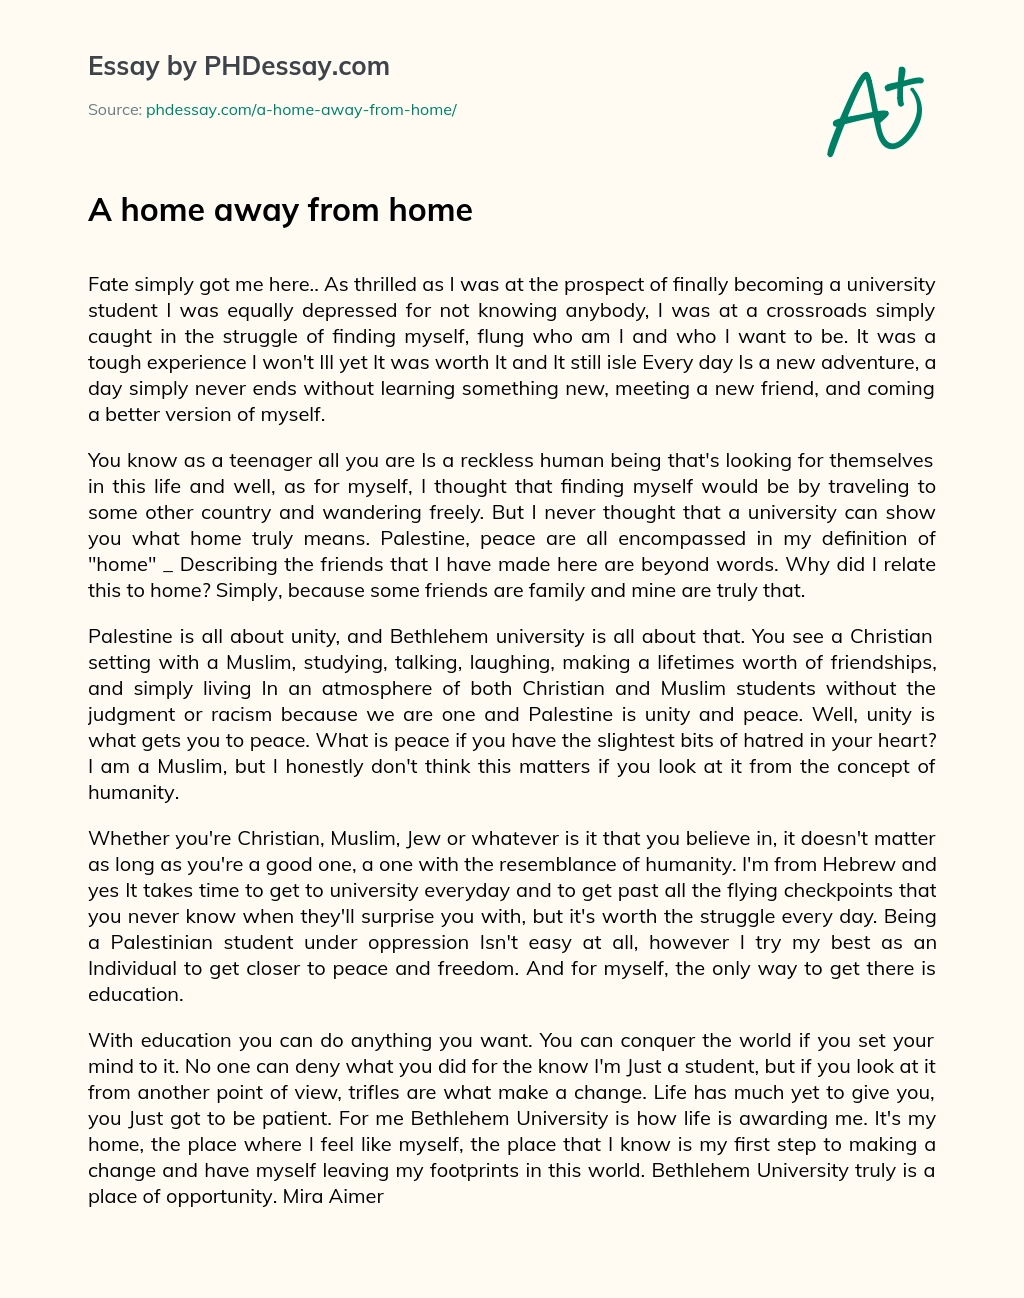 A home away from home essay